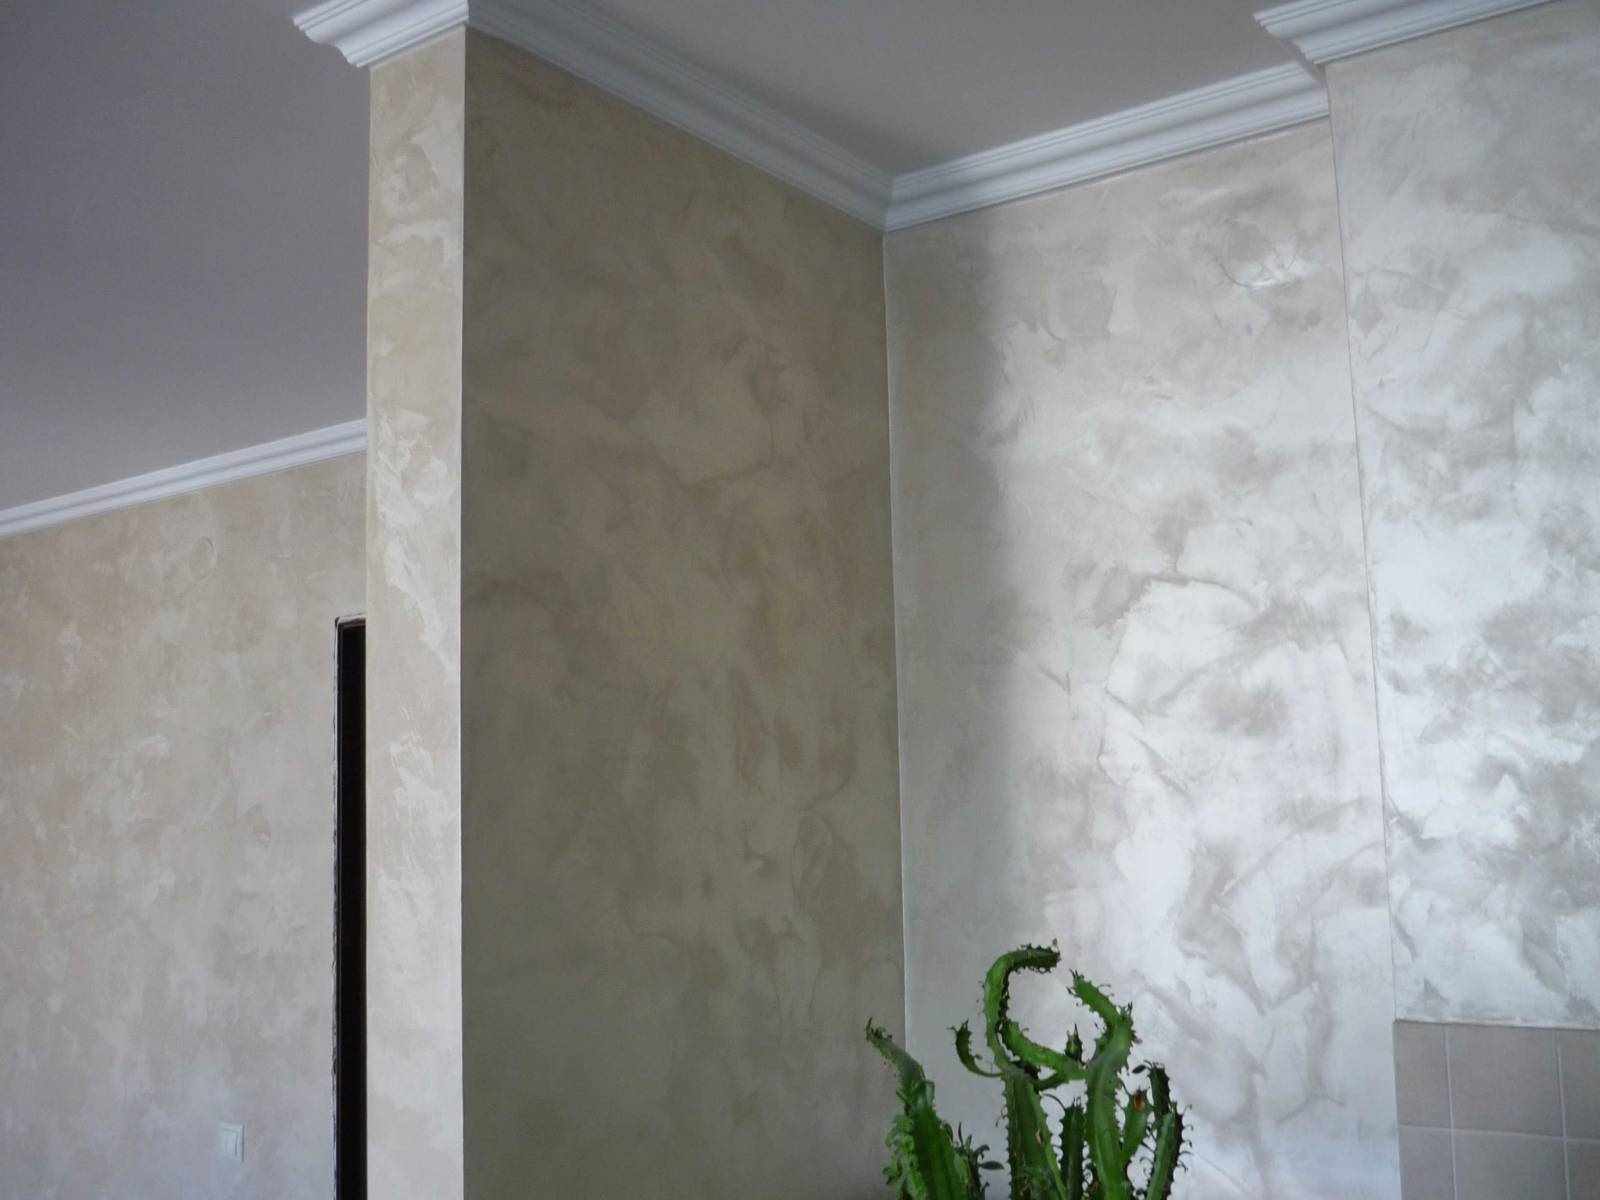 An example of using bright decorative plaster in a bathroom design